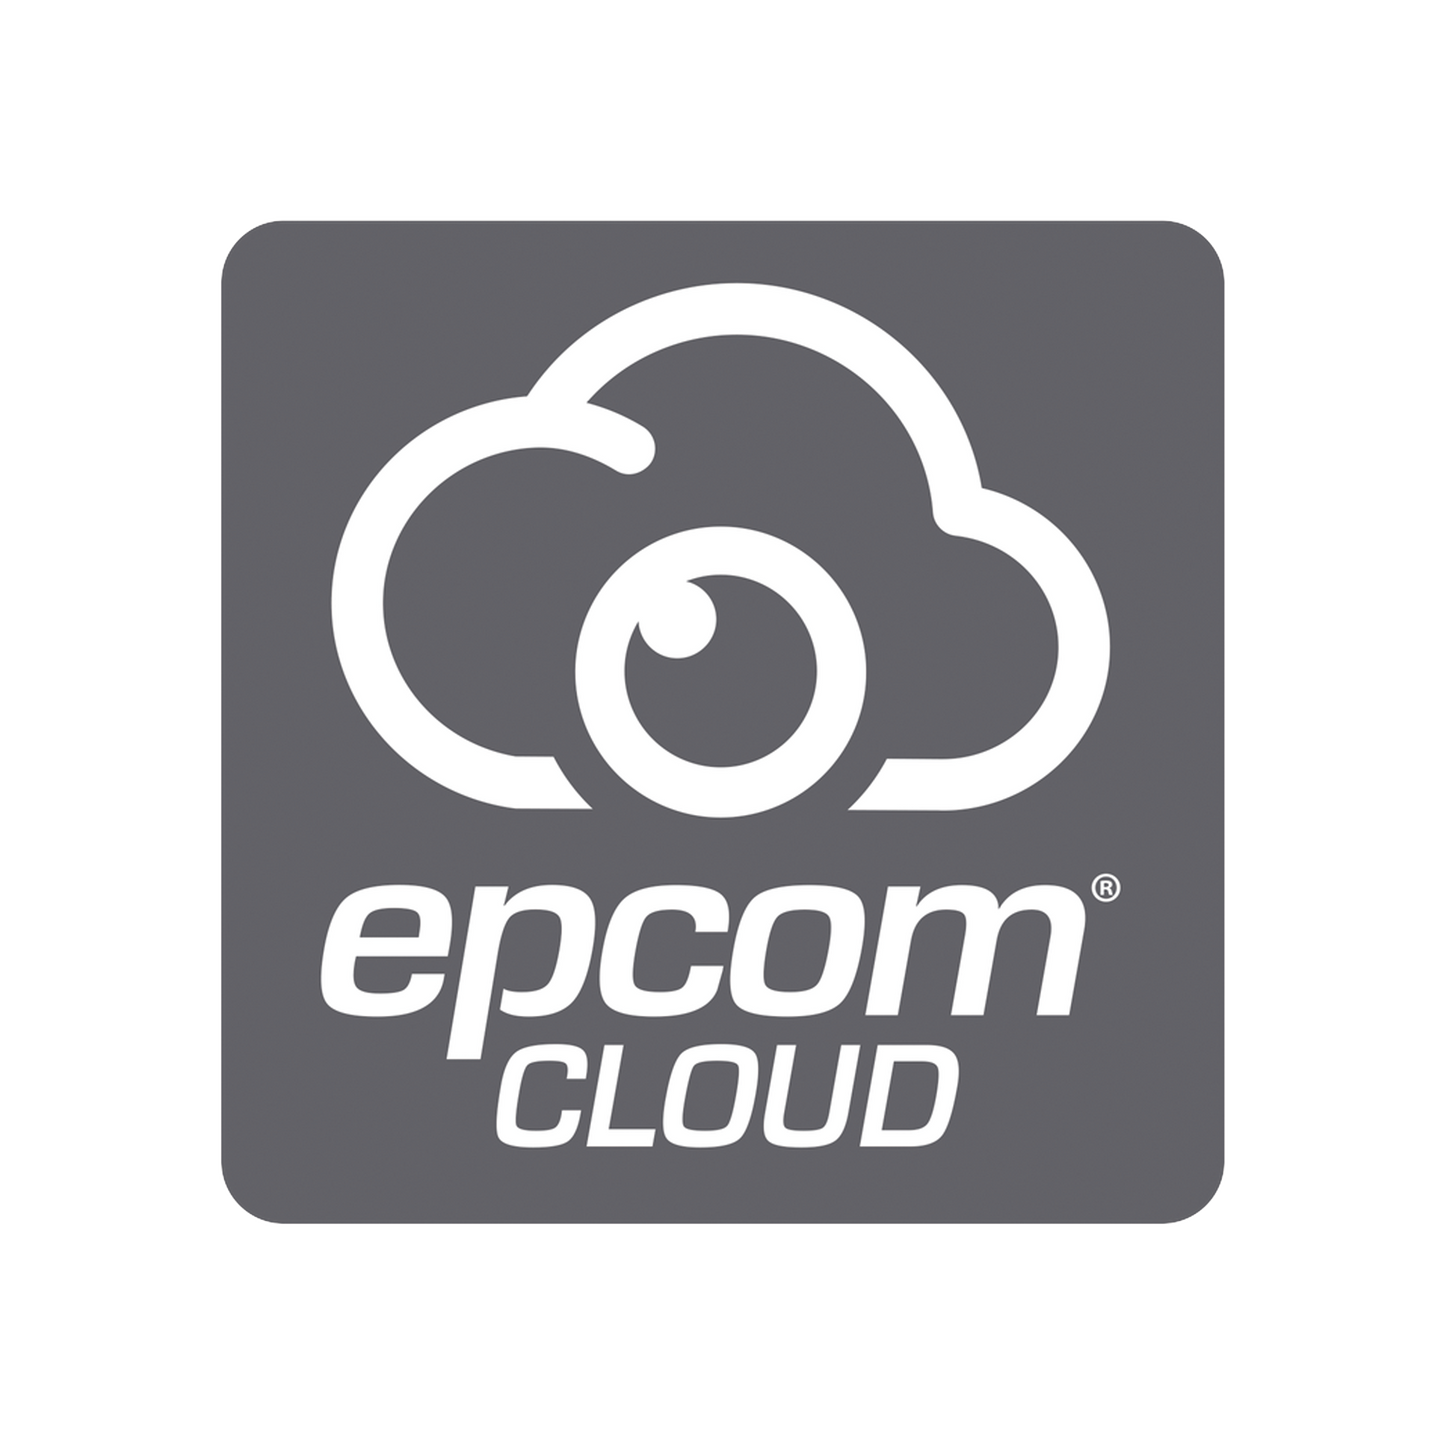 Epcom Cloud Annual Subscription / Cloud recording for 1 video channel at 8MP with 2 days retention / Continuous recording